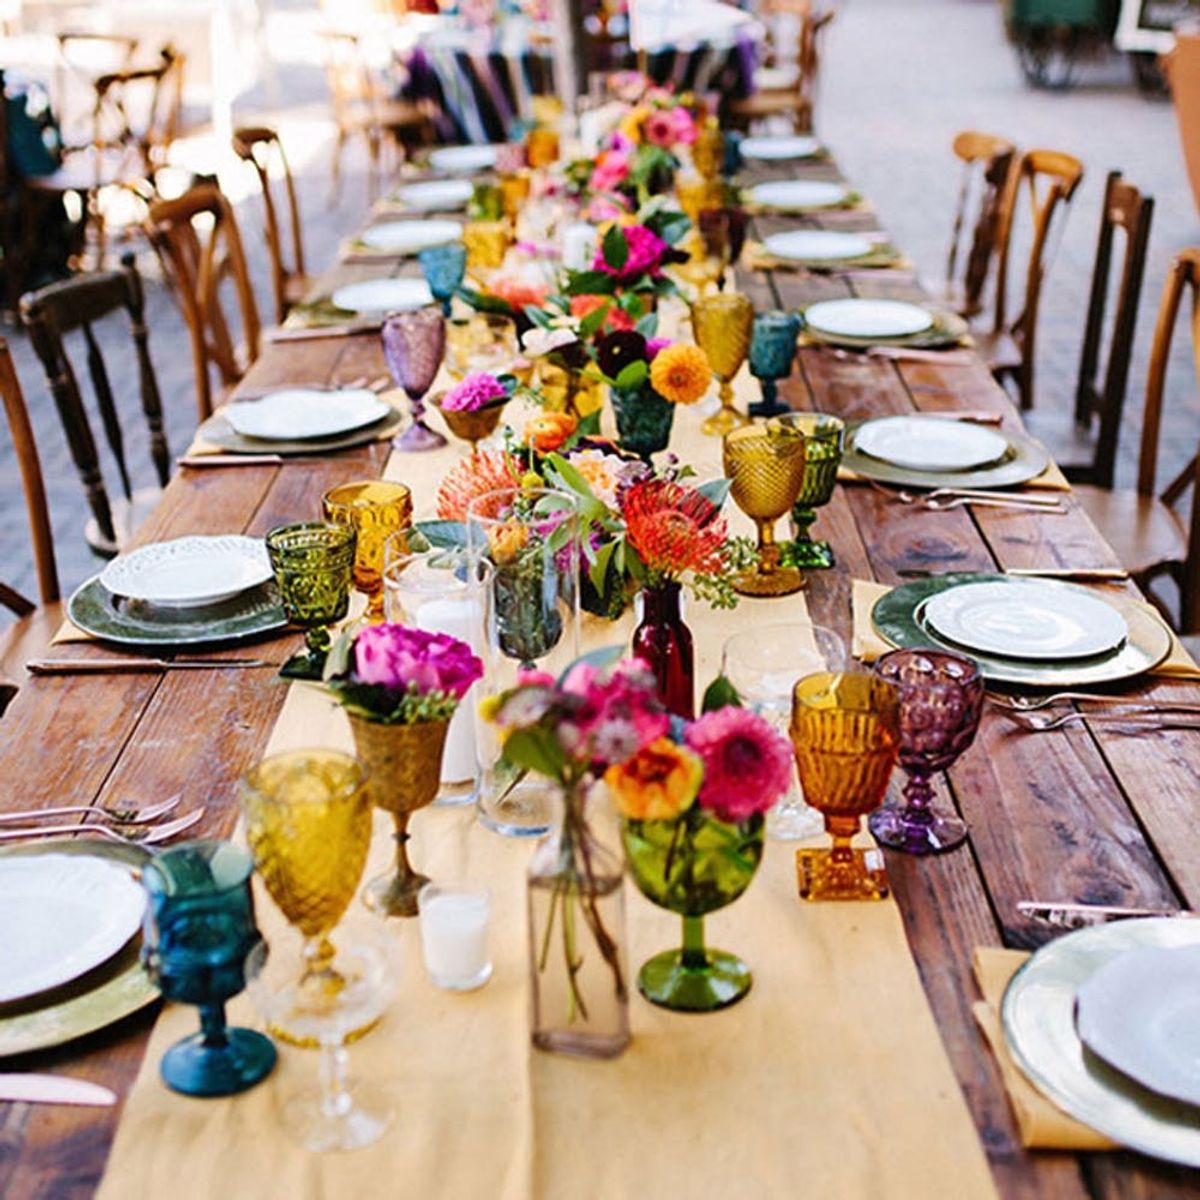 Add a Splash of Color to Your Wedding Tables With These Vintage-Inspired Glasses